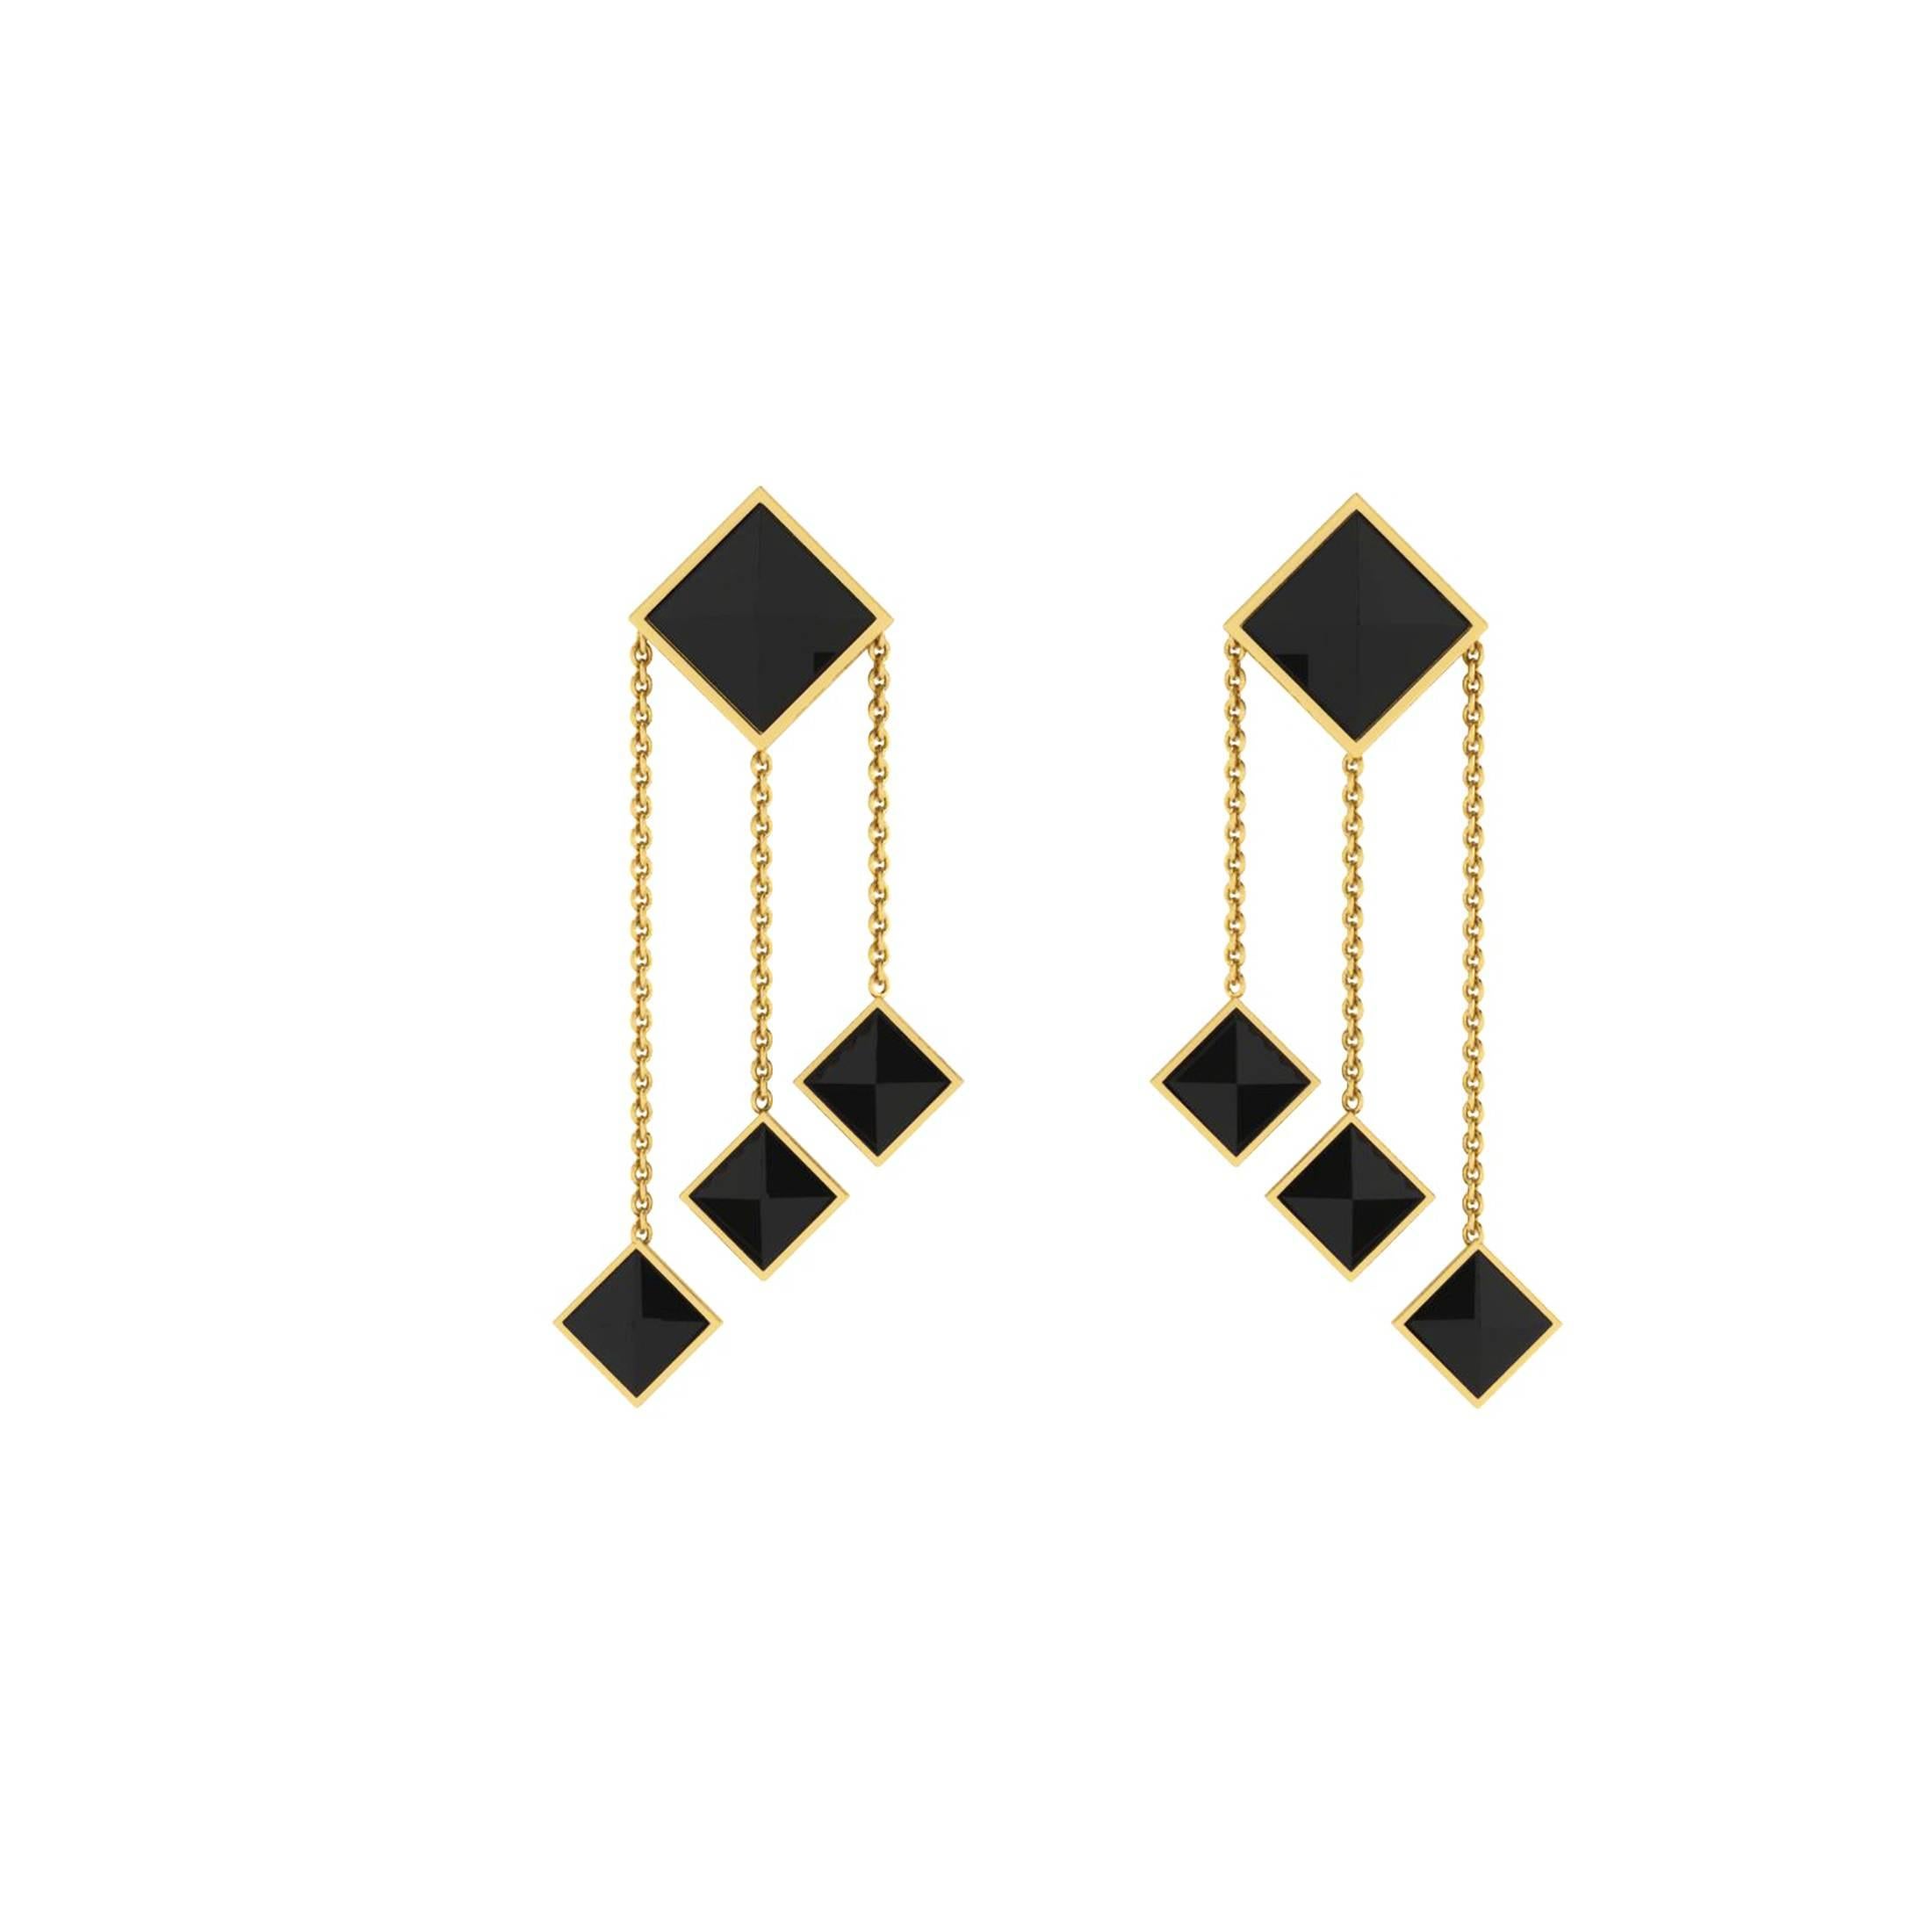 From FERRUCCI Pyramids collection, these black Onyx pyramid cuts, set in 18k yellow gold dangling earrings, hand made in New York city by Italian designer Francesco Ferrucci, an Art Deco inspired design, elegant and light for every occasion and for